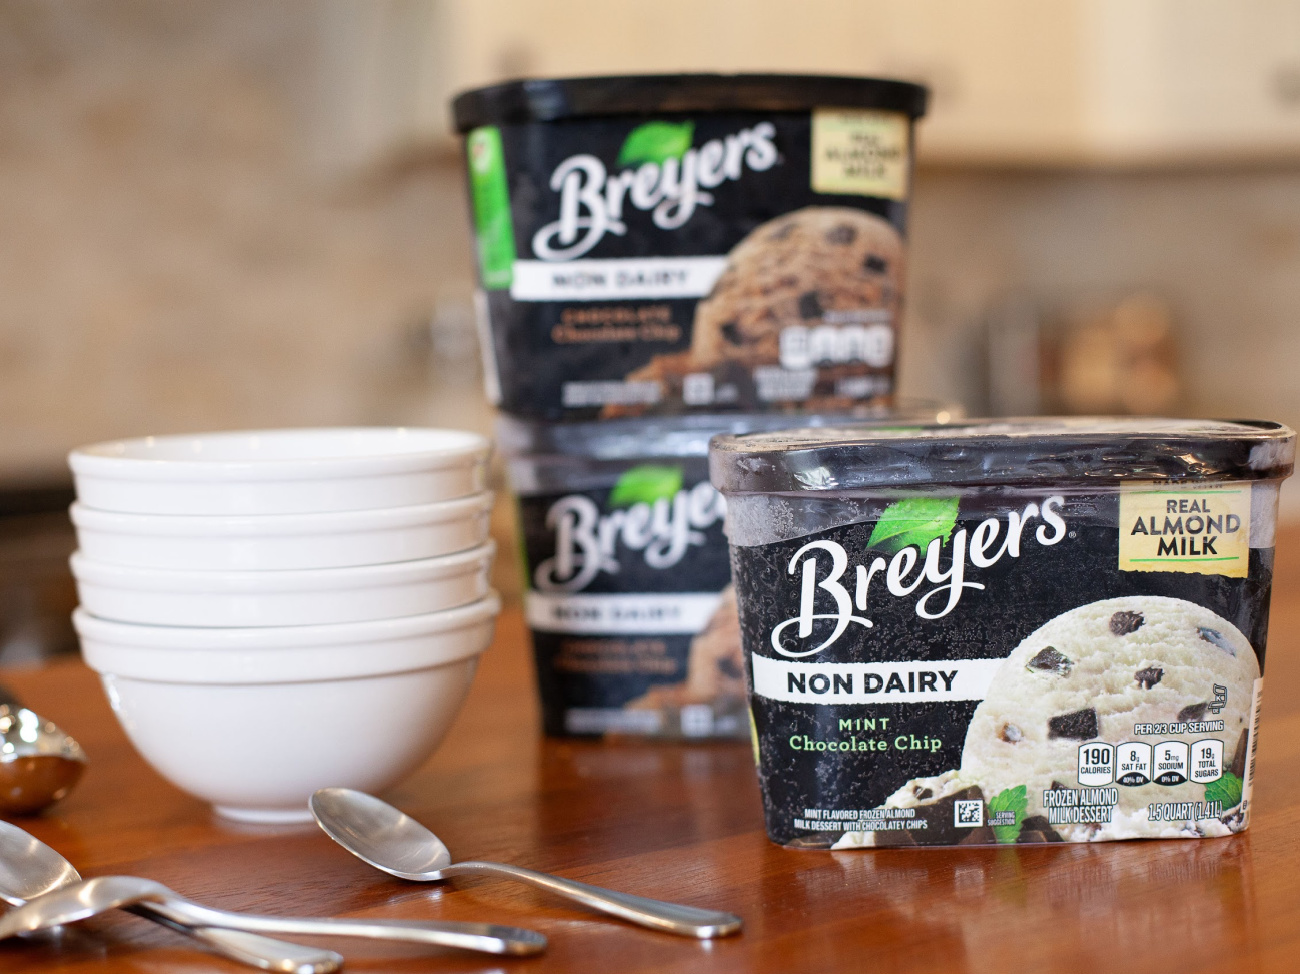 Breyers Ice Cream Is Buy One, Get One Free - Better Make Room In The Freezer! on I Heart Publix